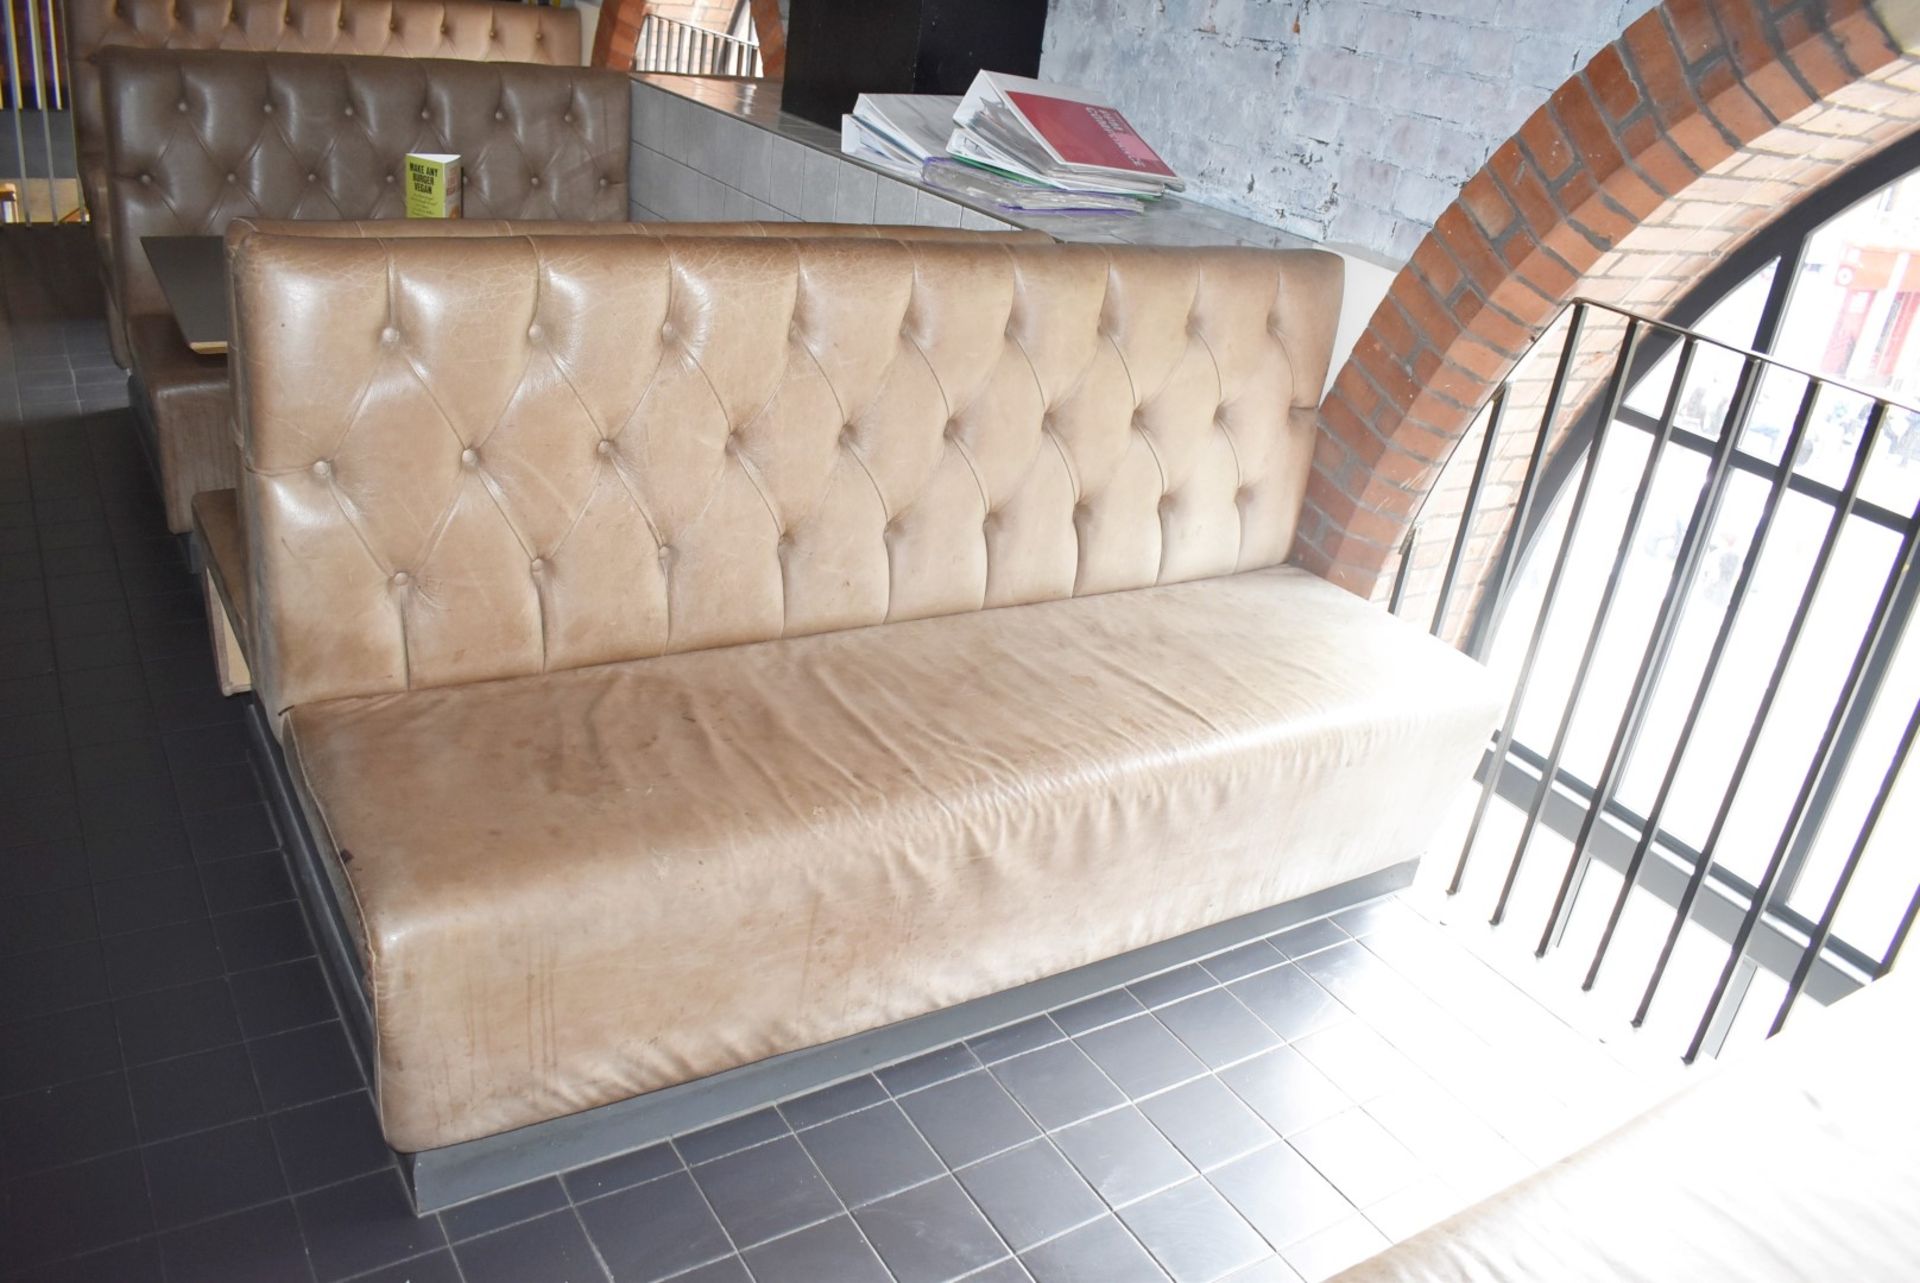 1 x Collection of Restaurant Seating Benches With Brown Leather Upholstery and Studded Backs - Image 19 of 26